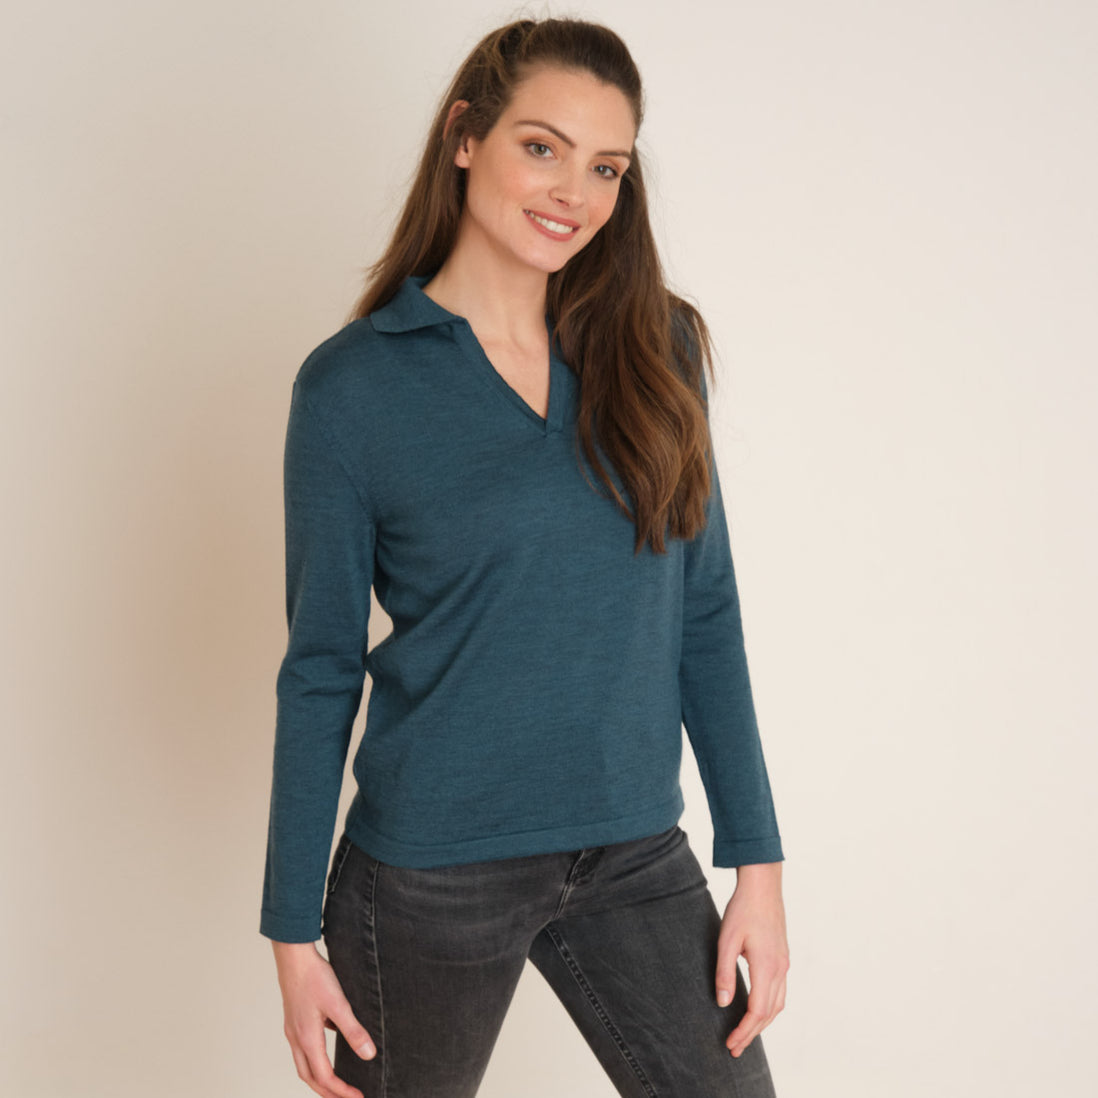 Affordable Ethical & Sustainable Knitwear by BIBICO